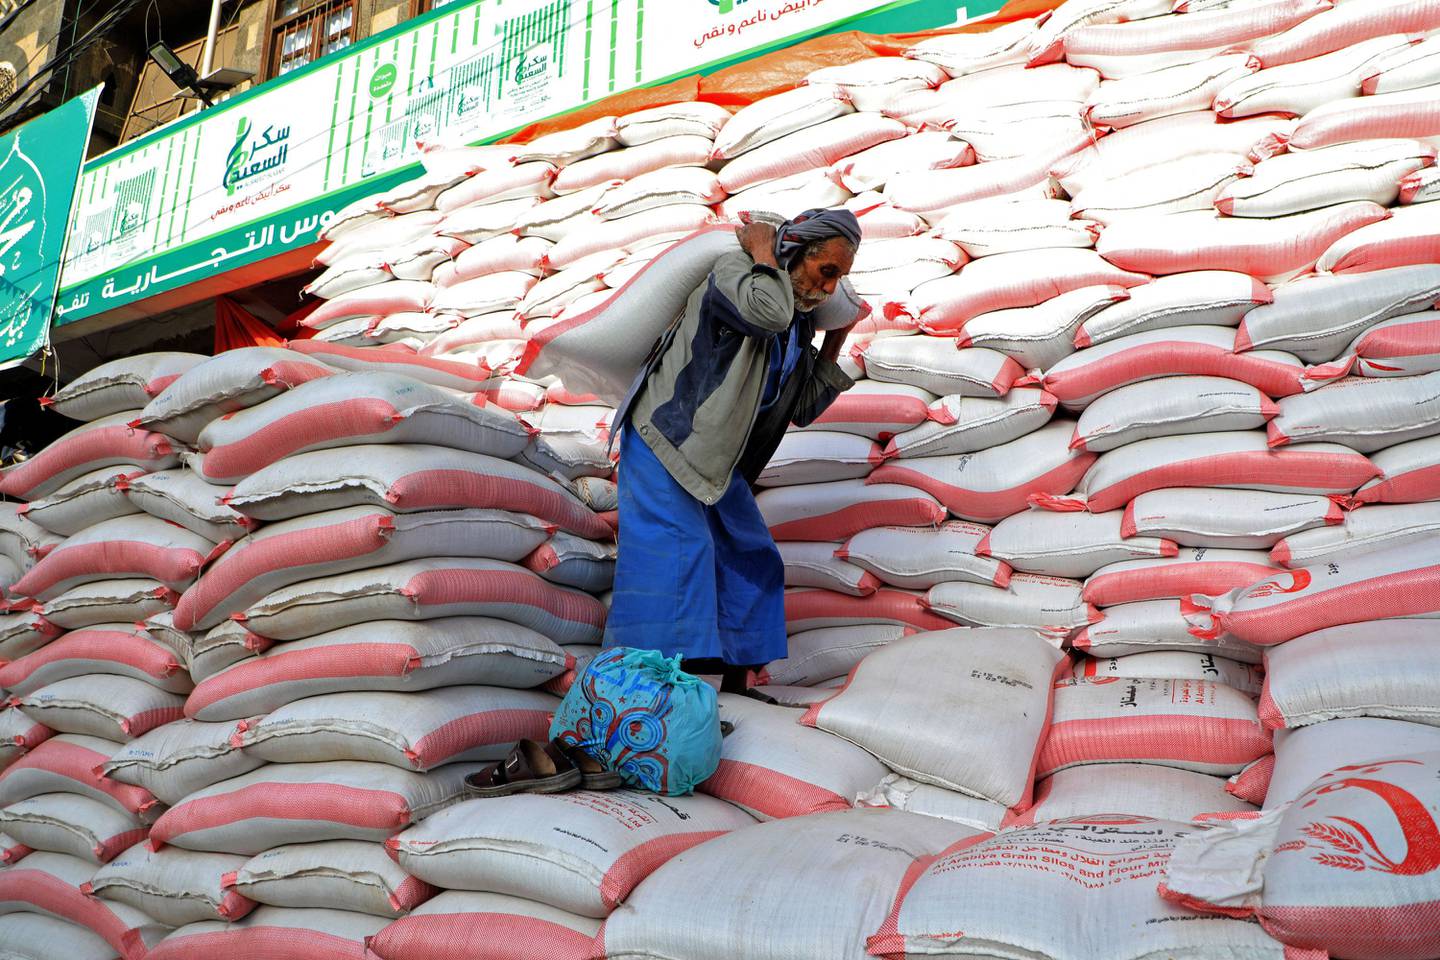 A Yemeni carries a bag of flour outside a wholesale store in the capital, Sanaa. AFP